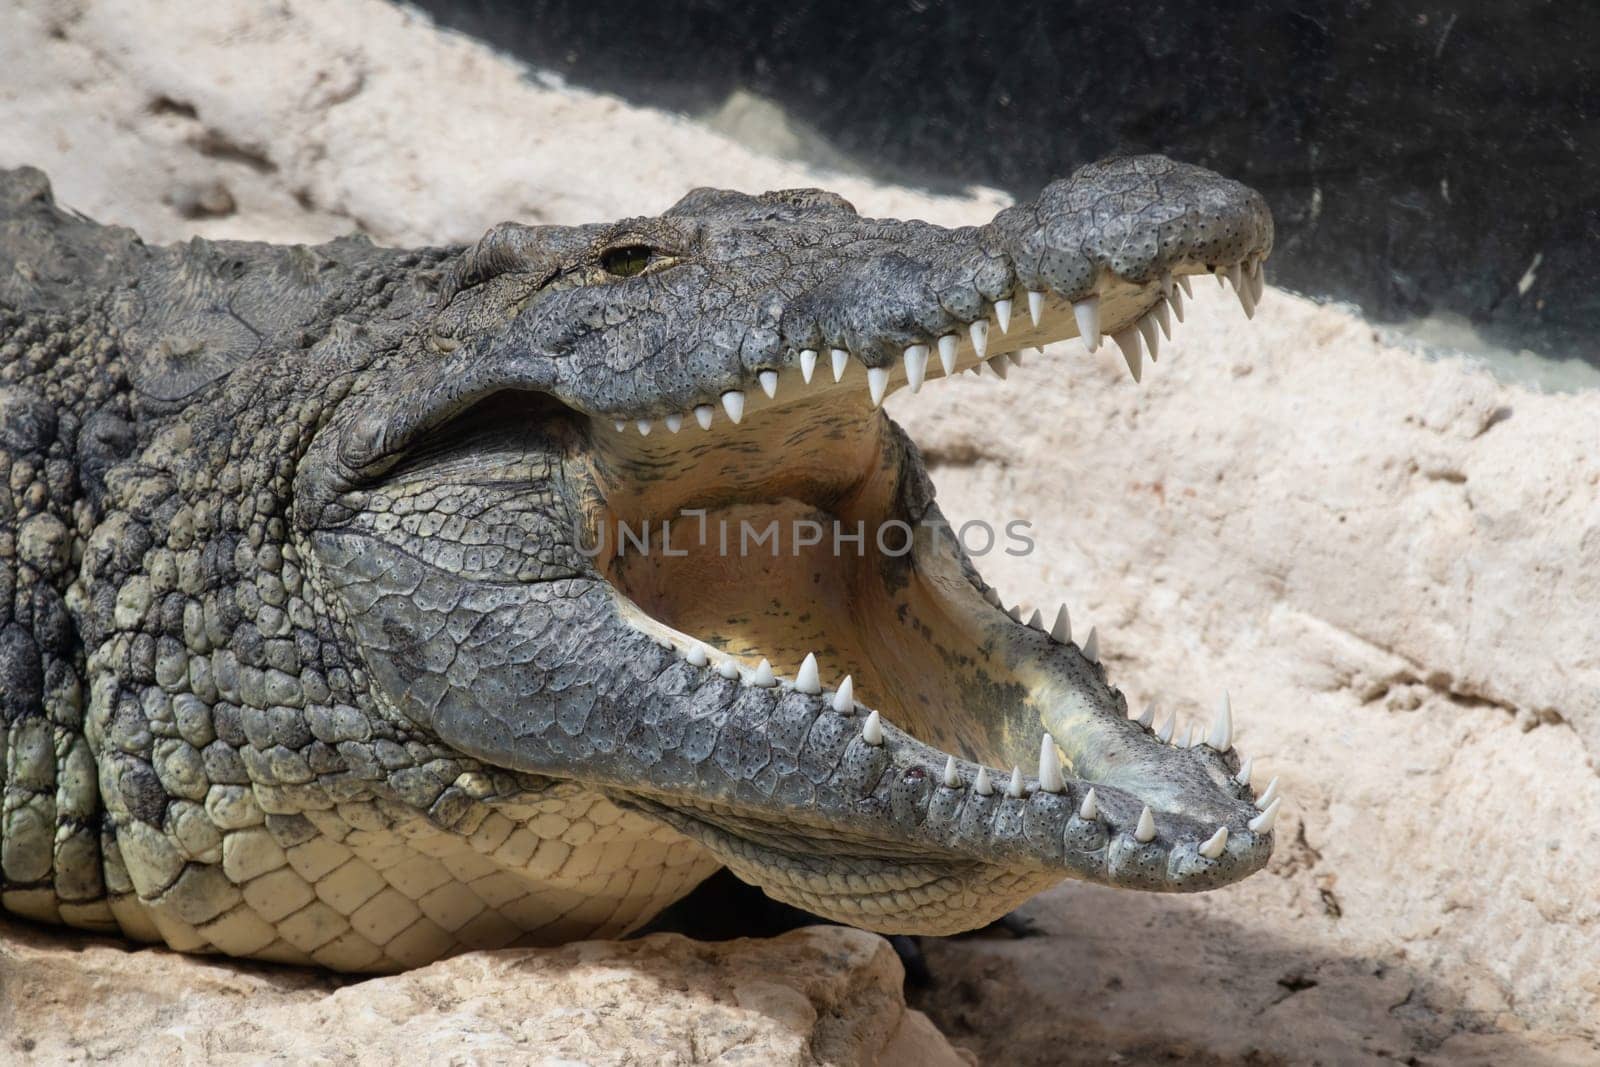 The crocodile opened its mouth waiting for food. High quality photo